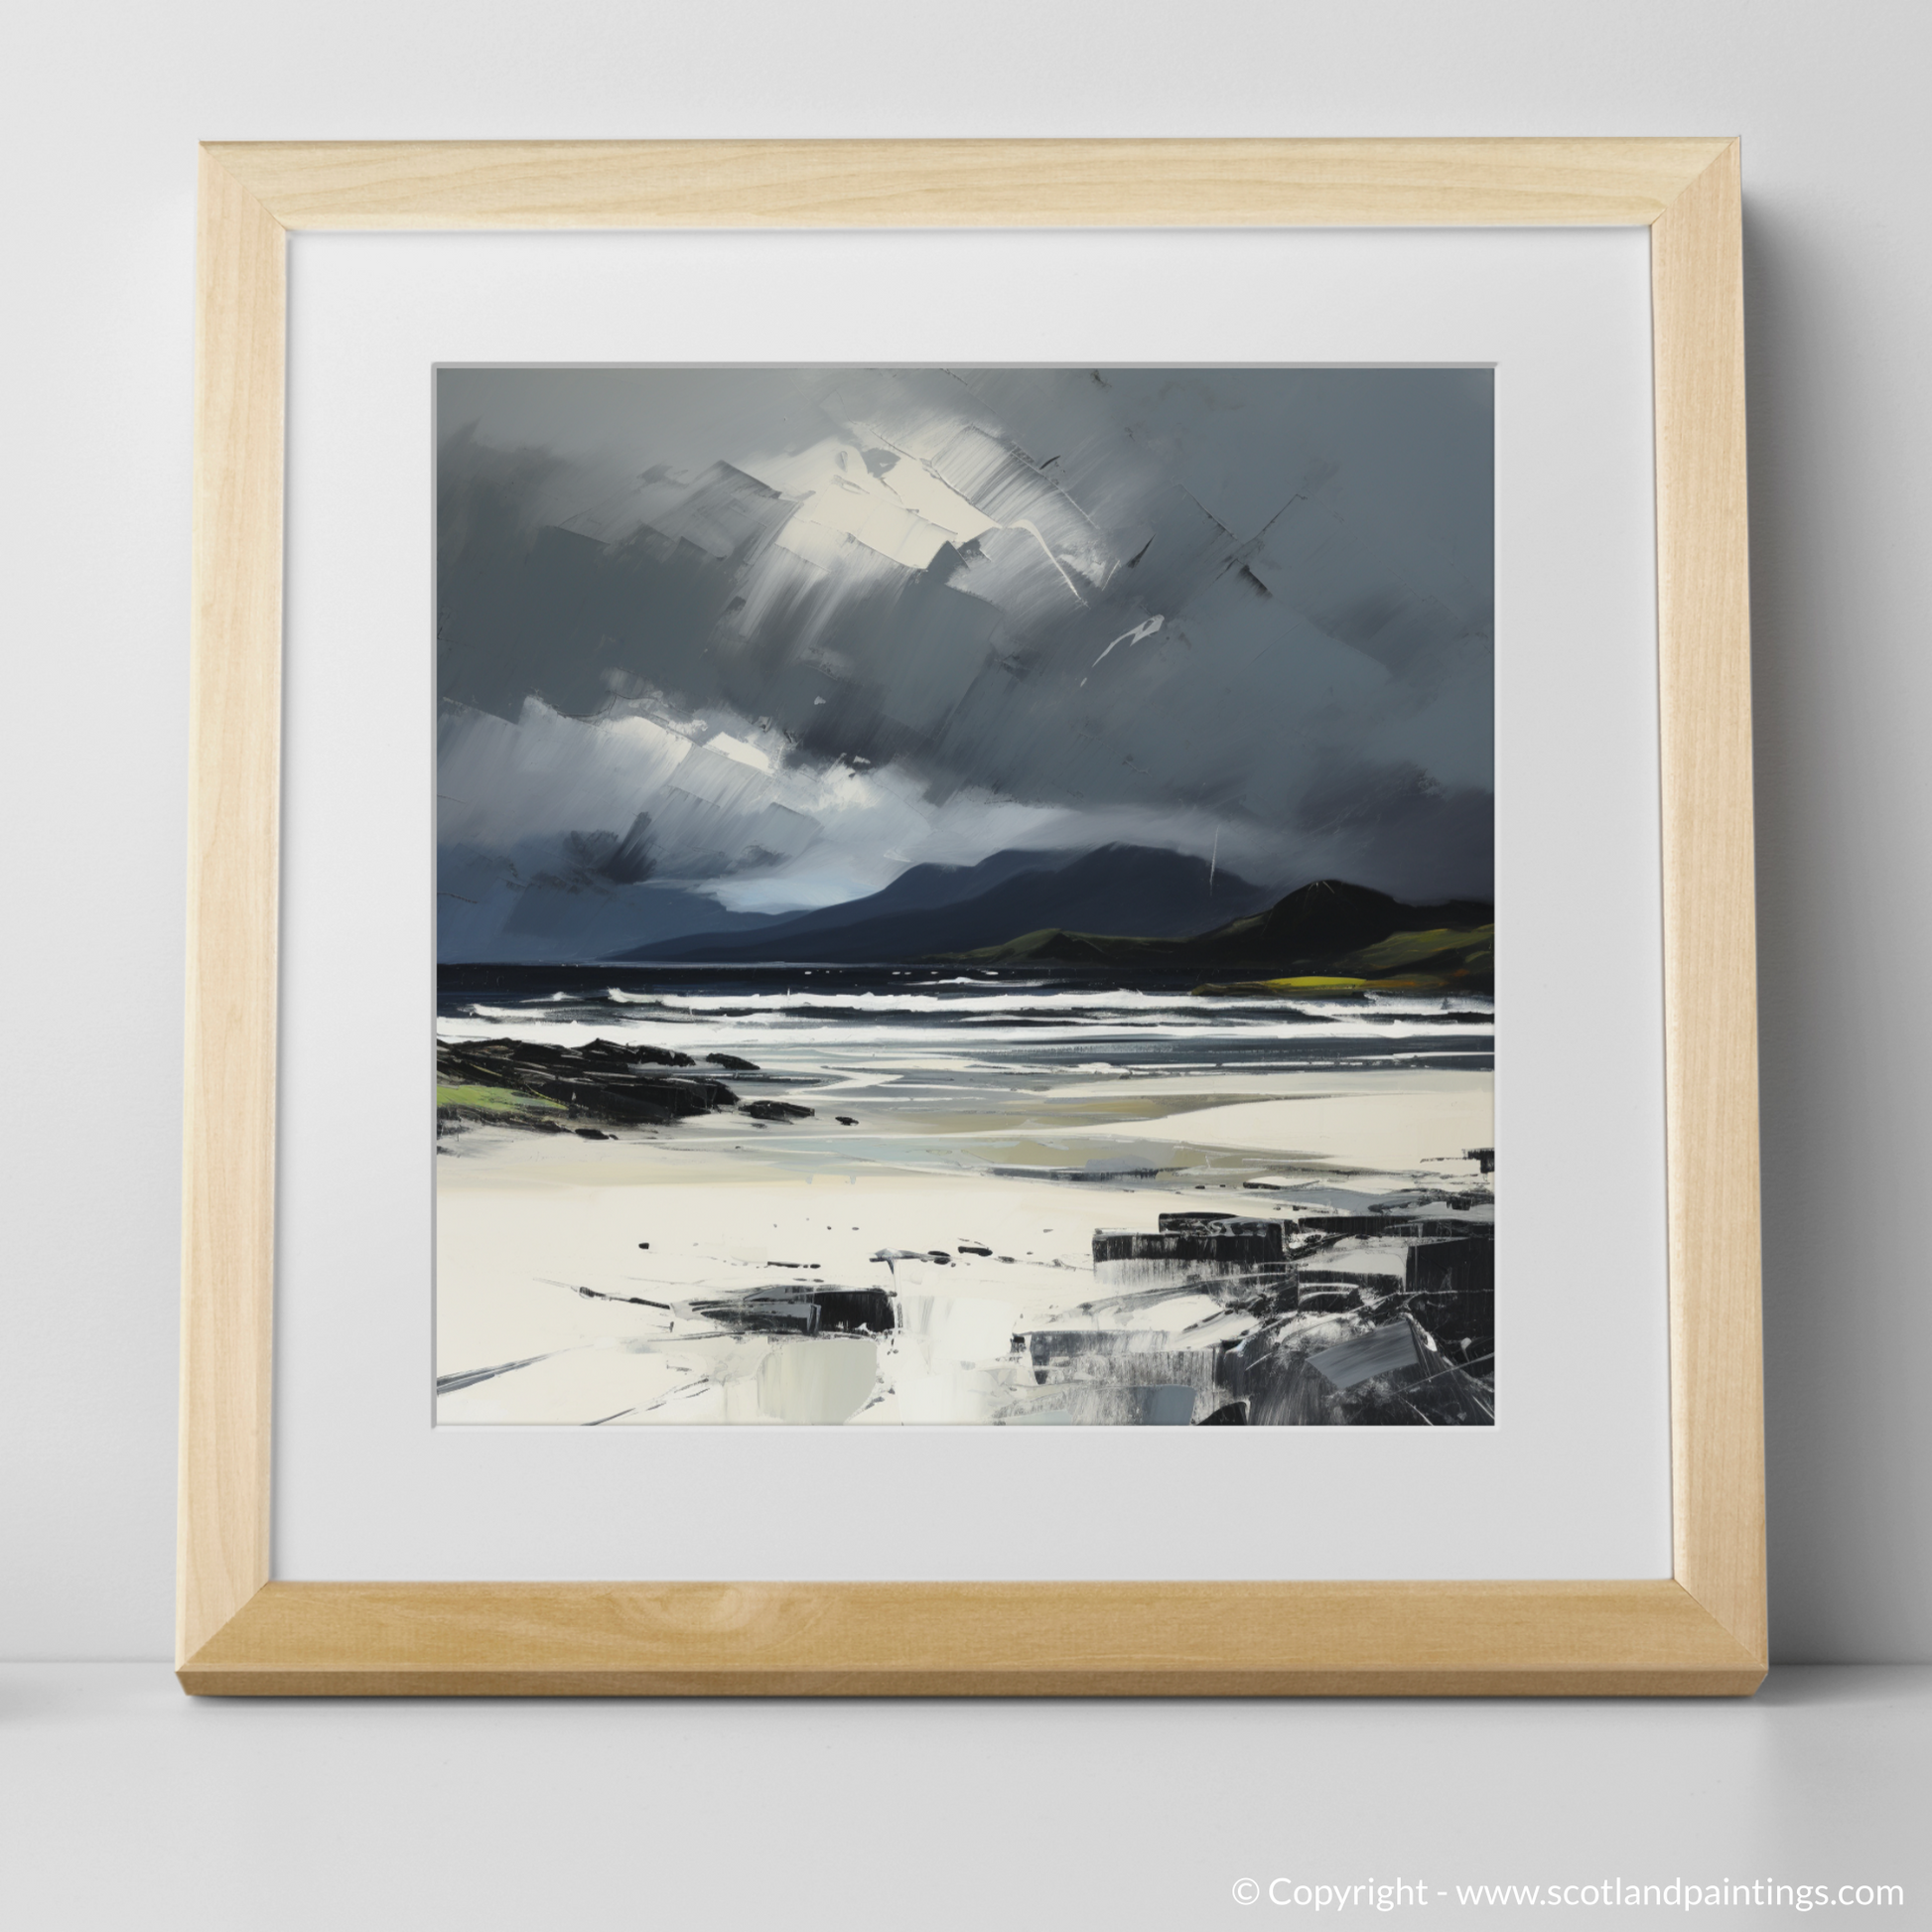 Art Print of Camusdarach Beach with a stormy sky with a natural frame